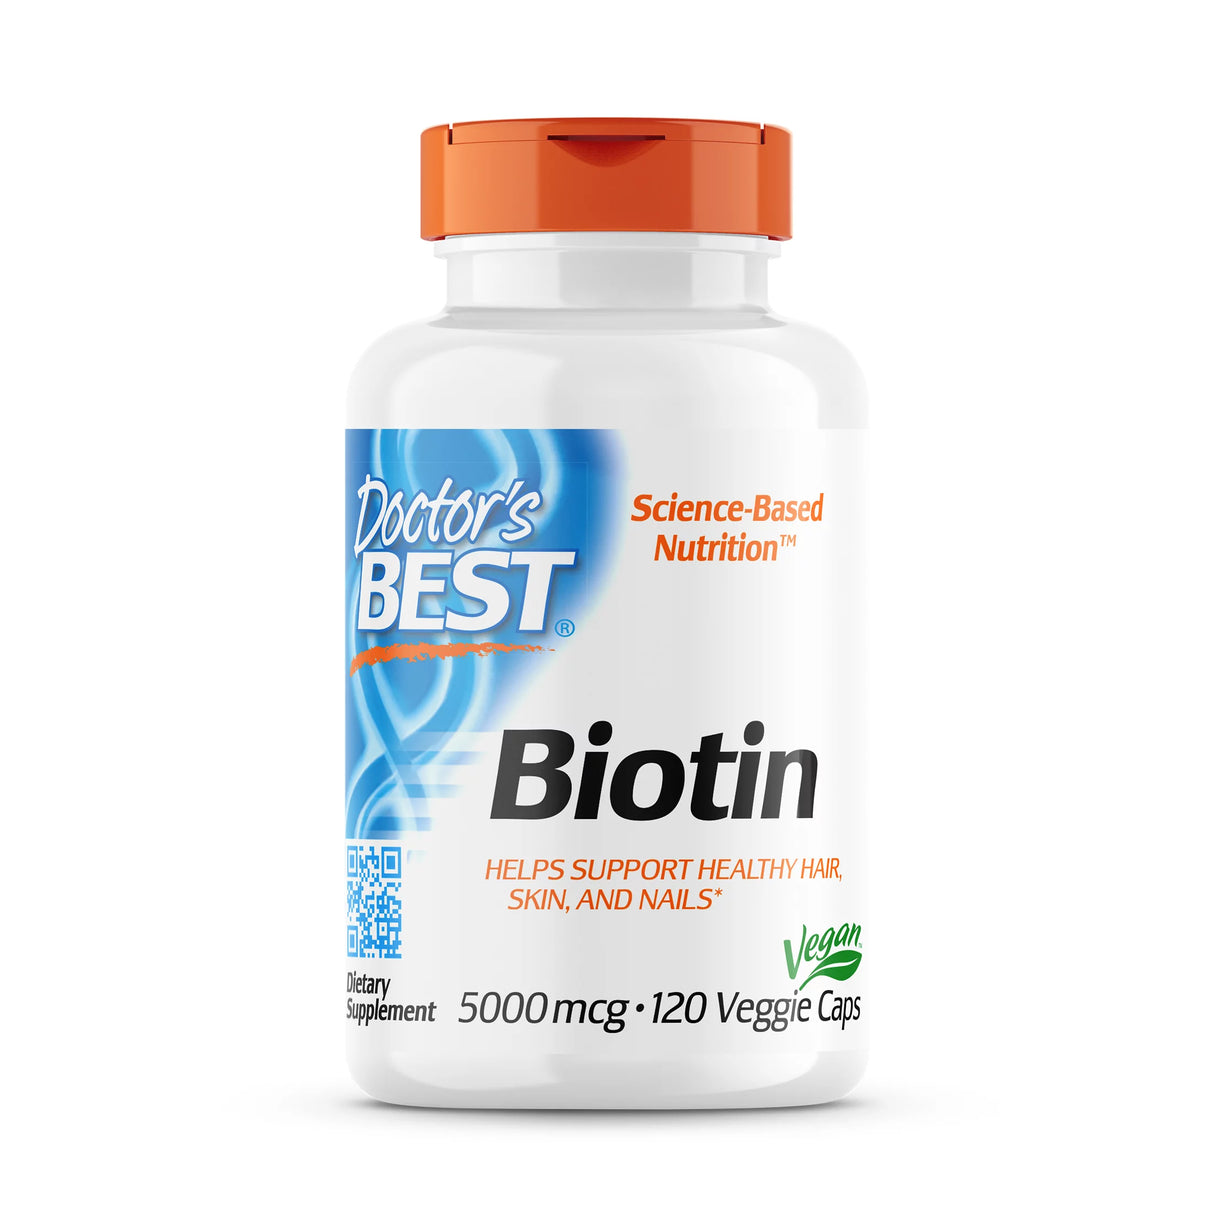 Doctor's Best Biotin 5000mcg - Supports Healthy Hair, Skin & Nails - Cozy Farm 